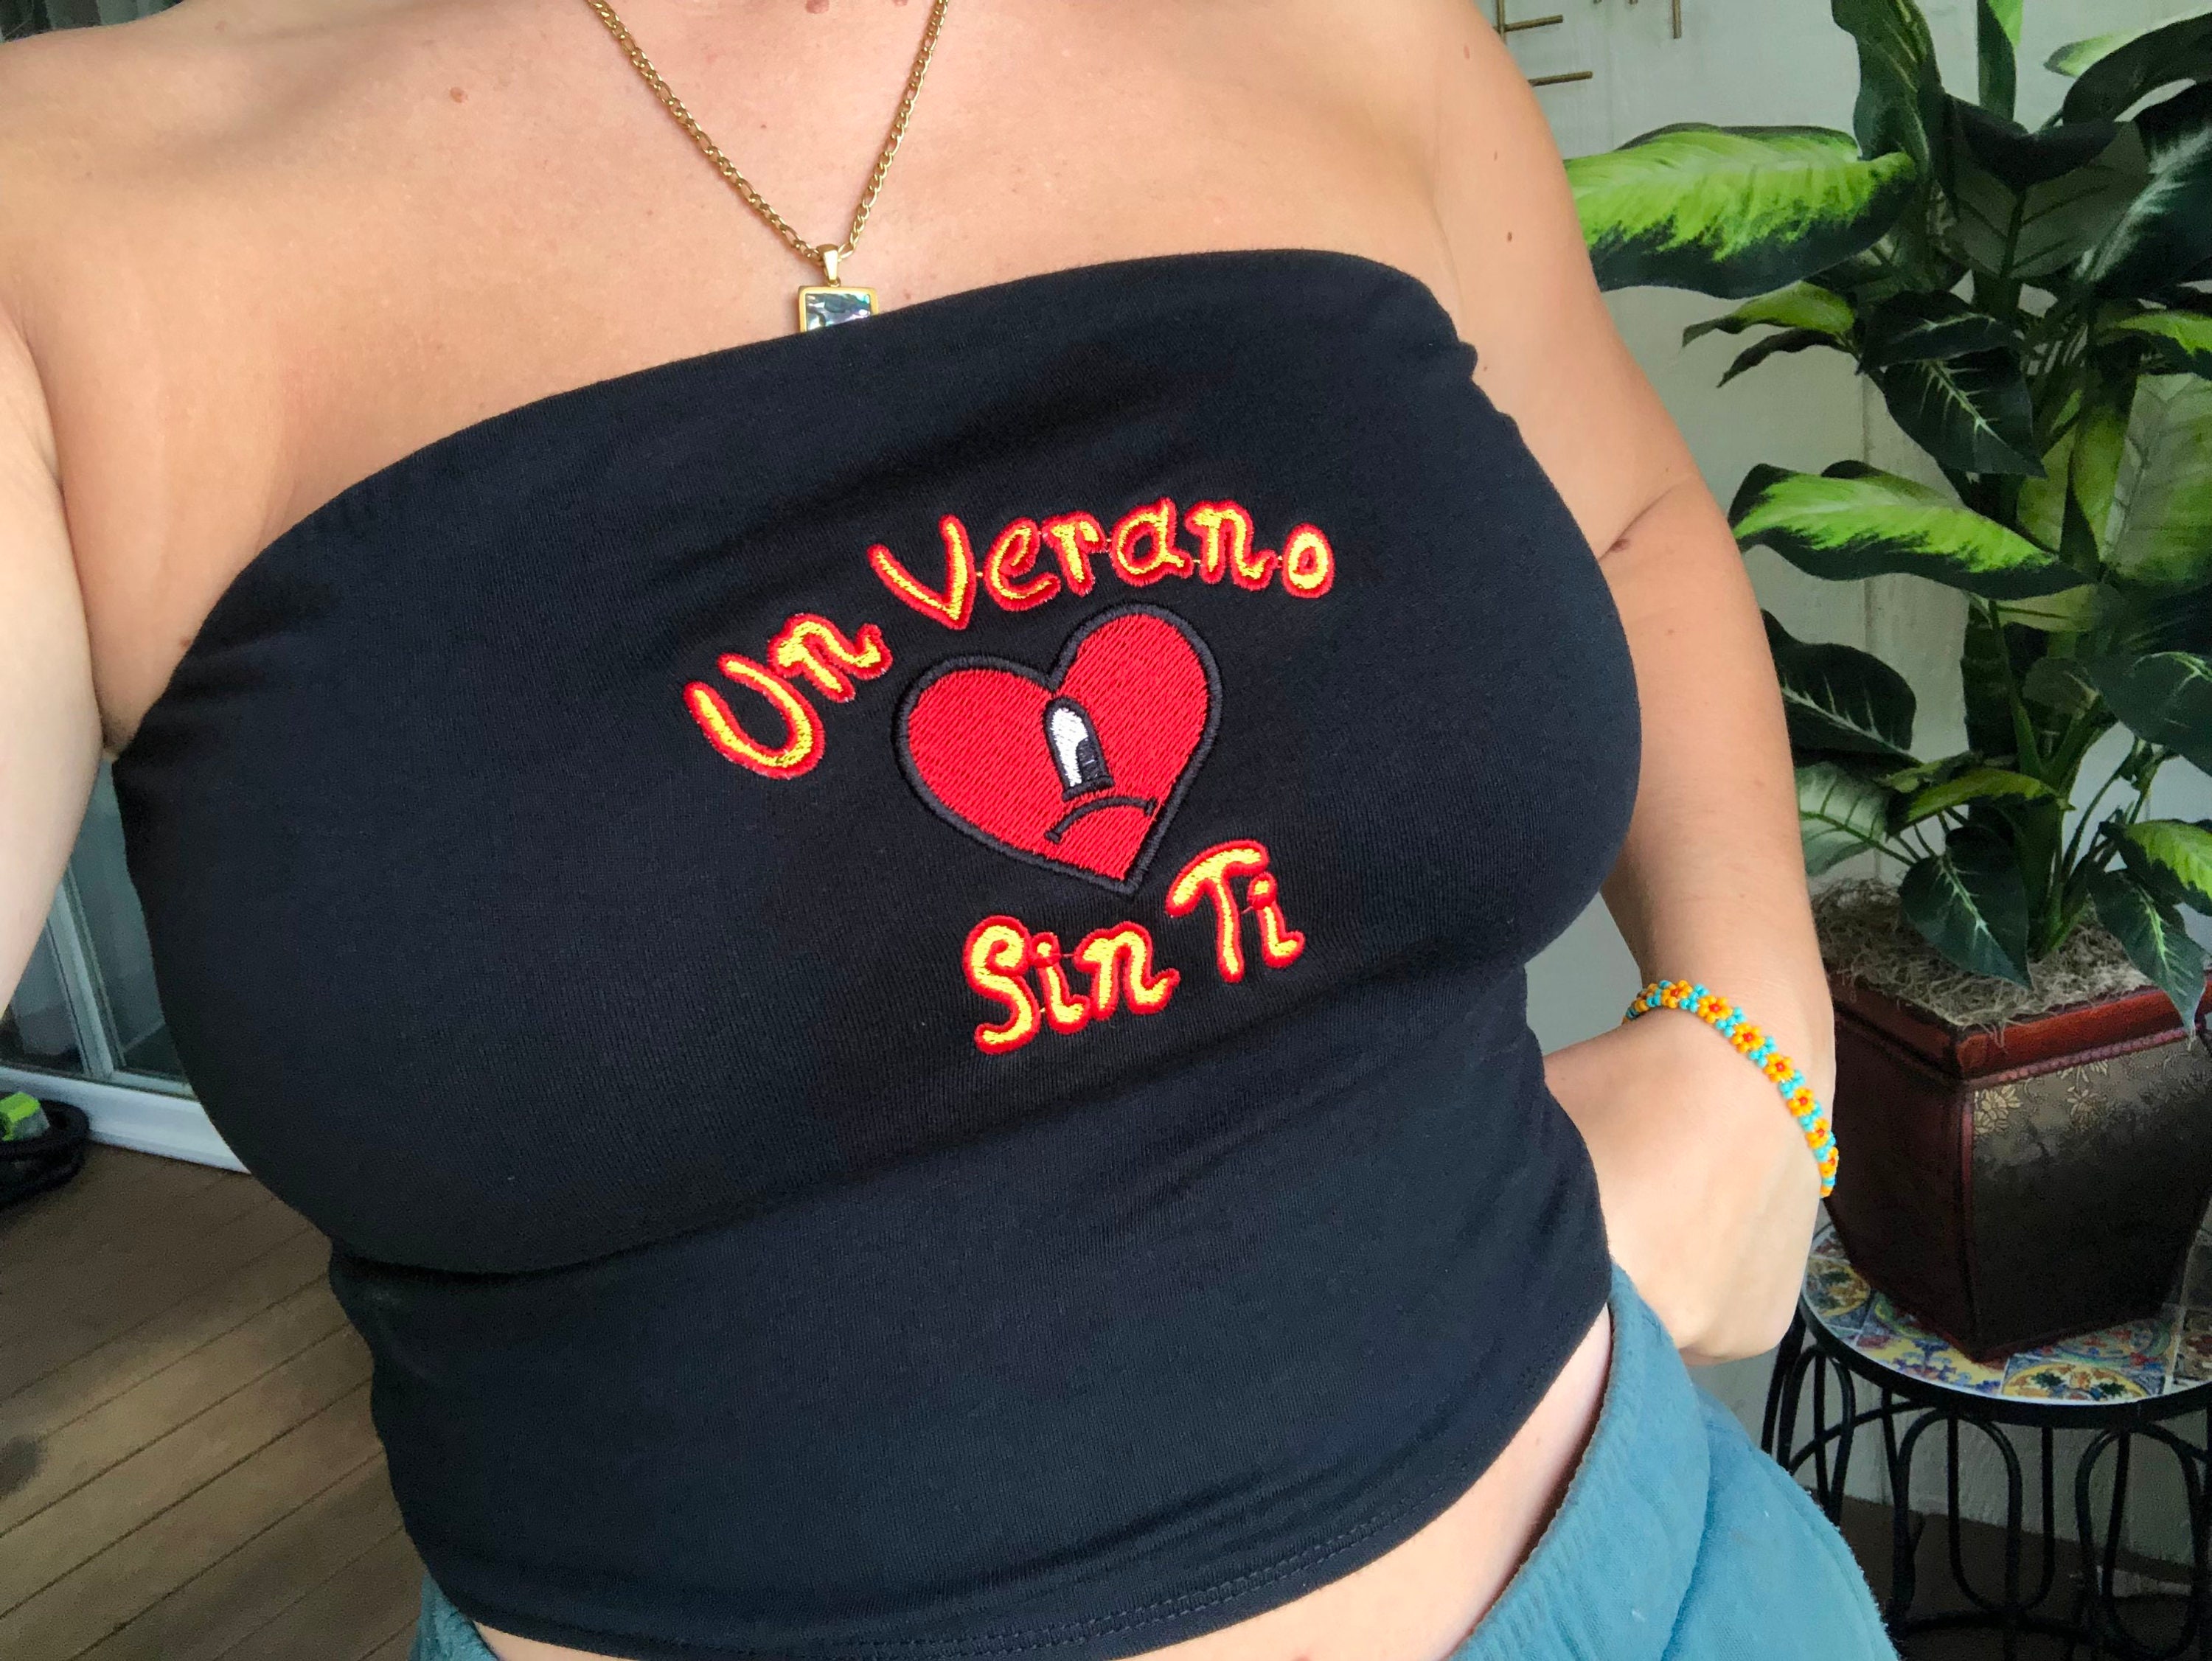 Kleding Dameskleding Tops & T-shirts Croptops & Bandeautops Bandeautops Bad Bunny Merch Bad Bunny Embroidered Cropped Tube Top World’s Hottest Tour Tube Top Tank Top Crop Top 